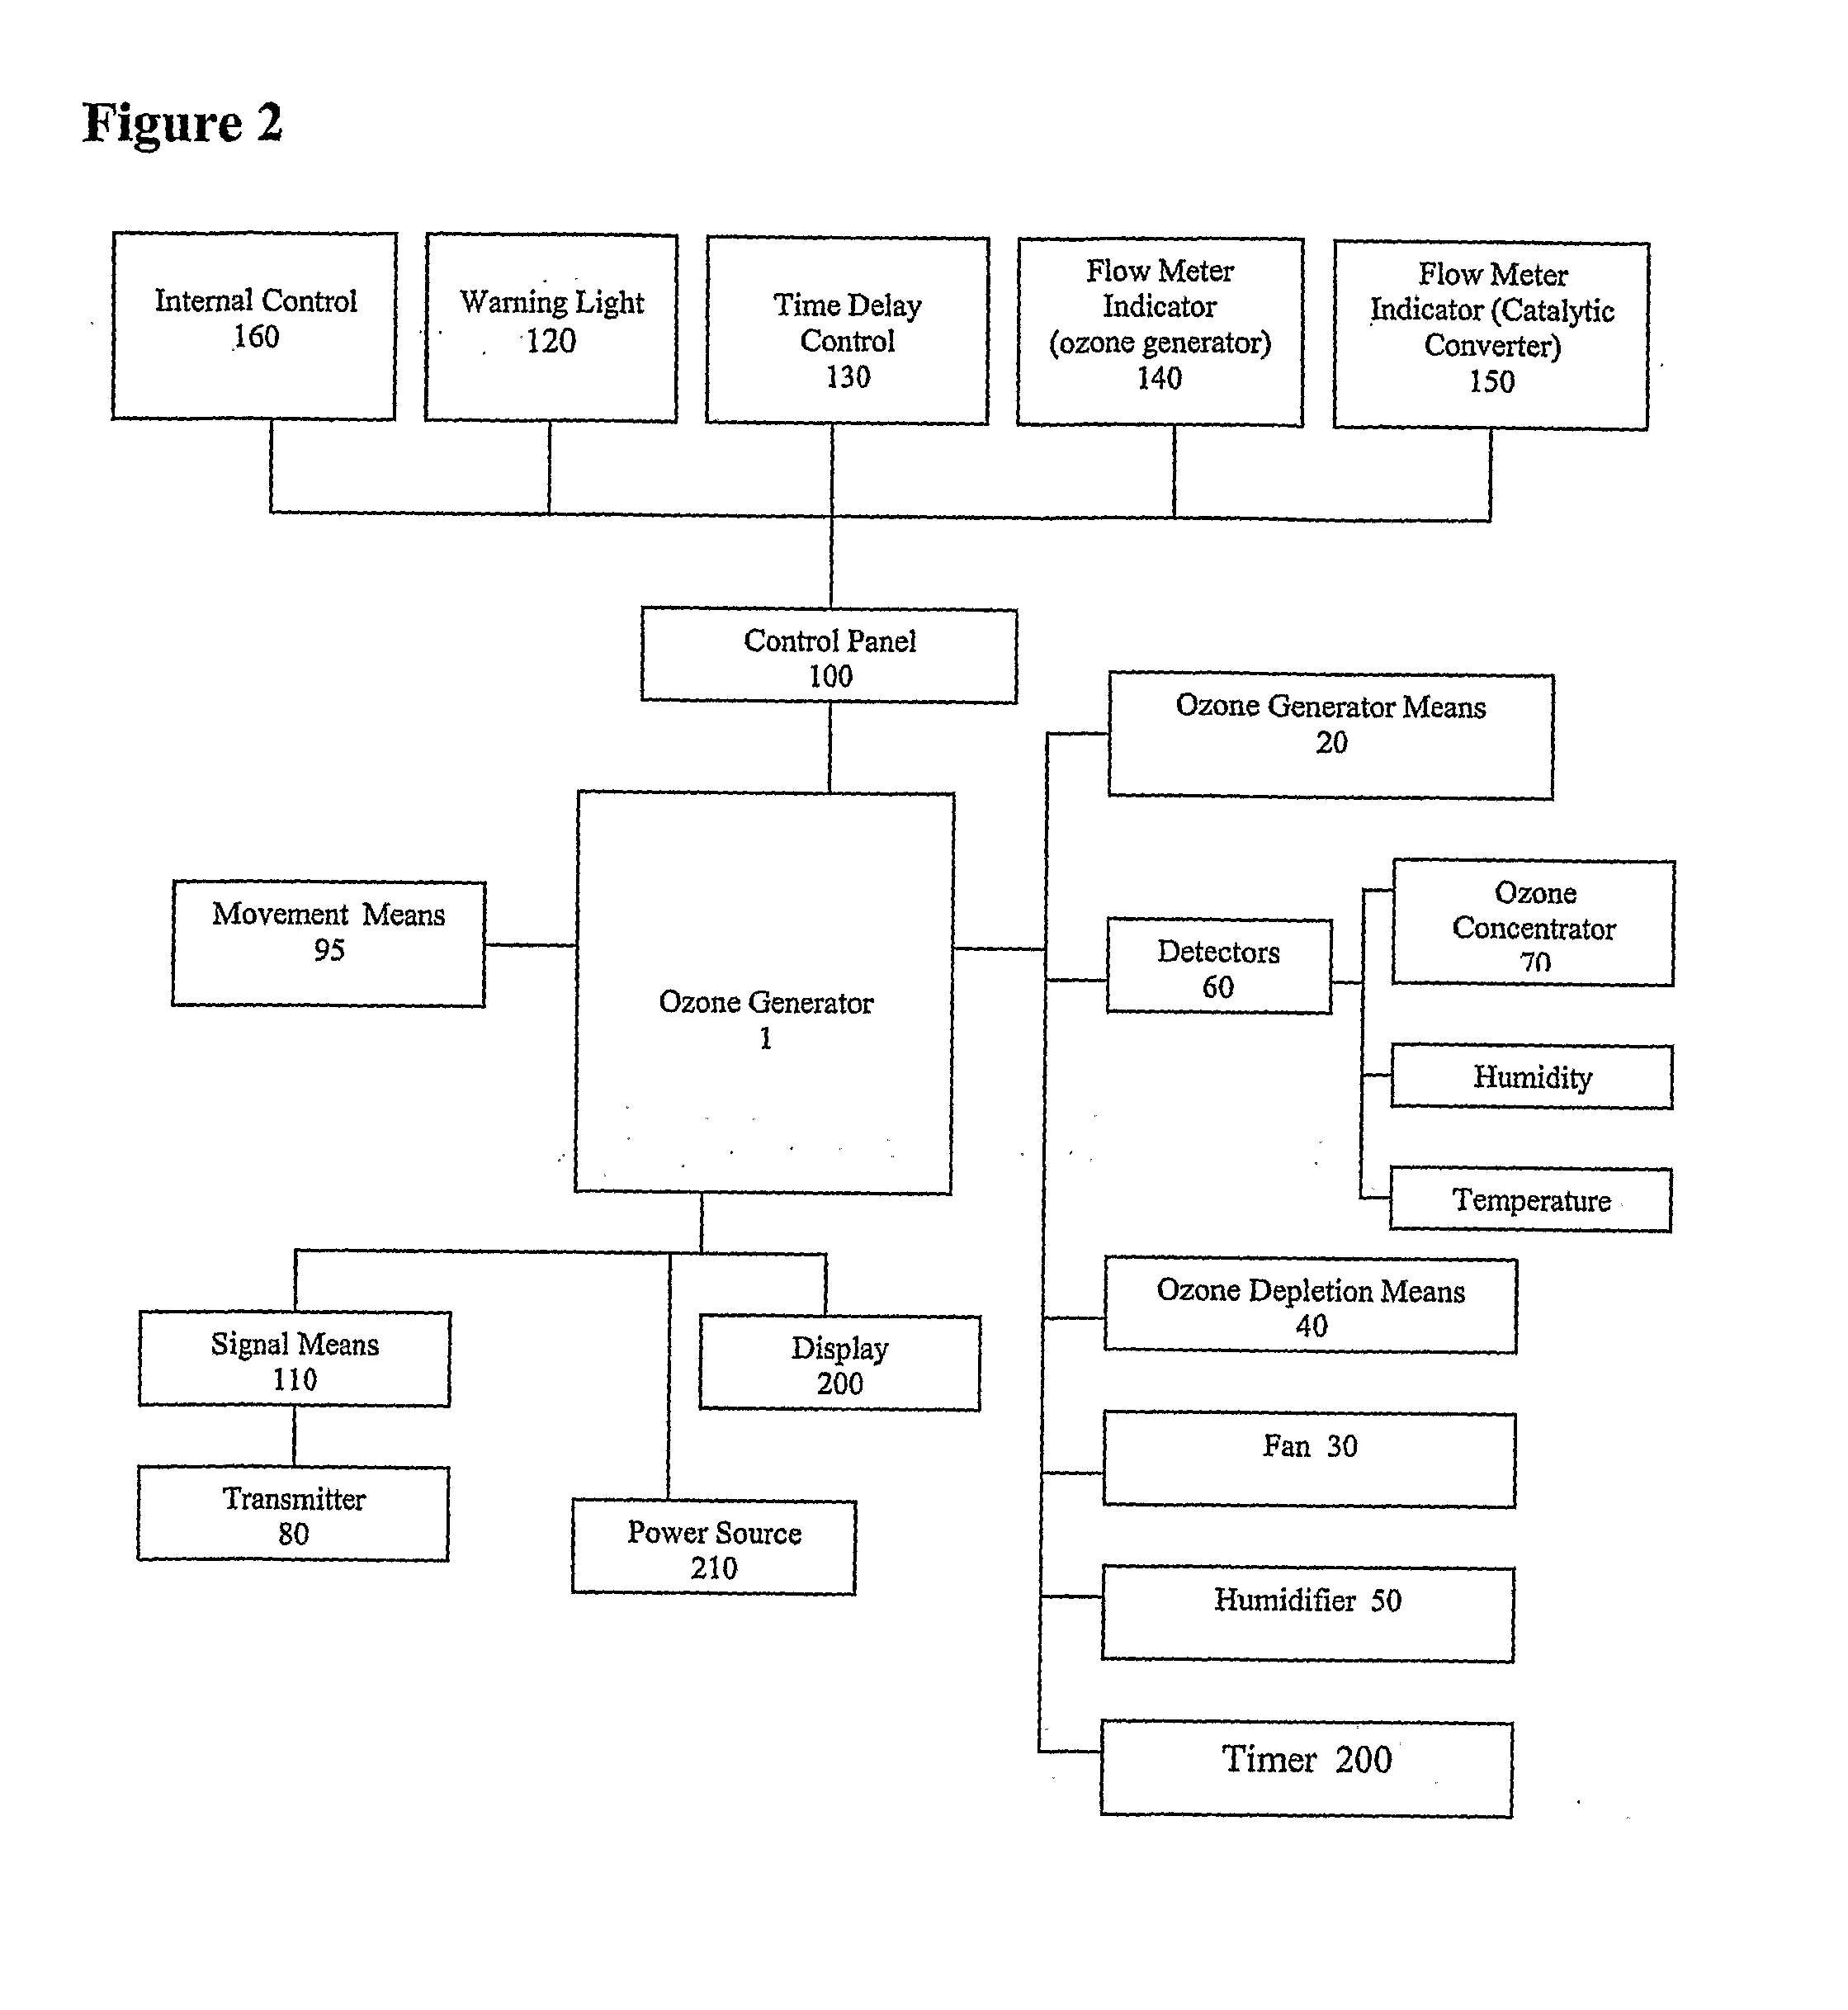 Apparatus and Method for Using Ozone as a Disinfectant